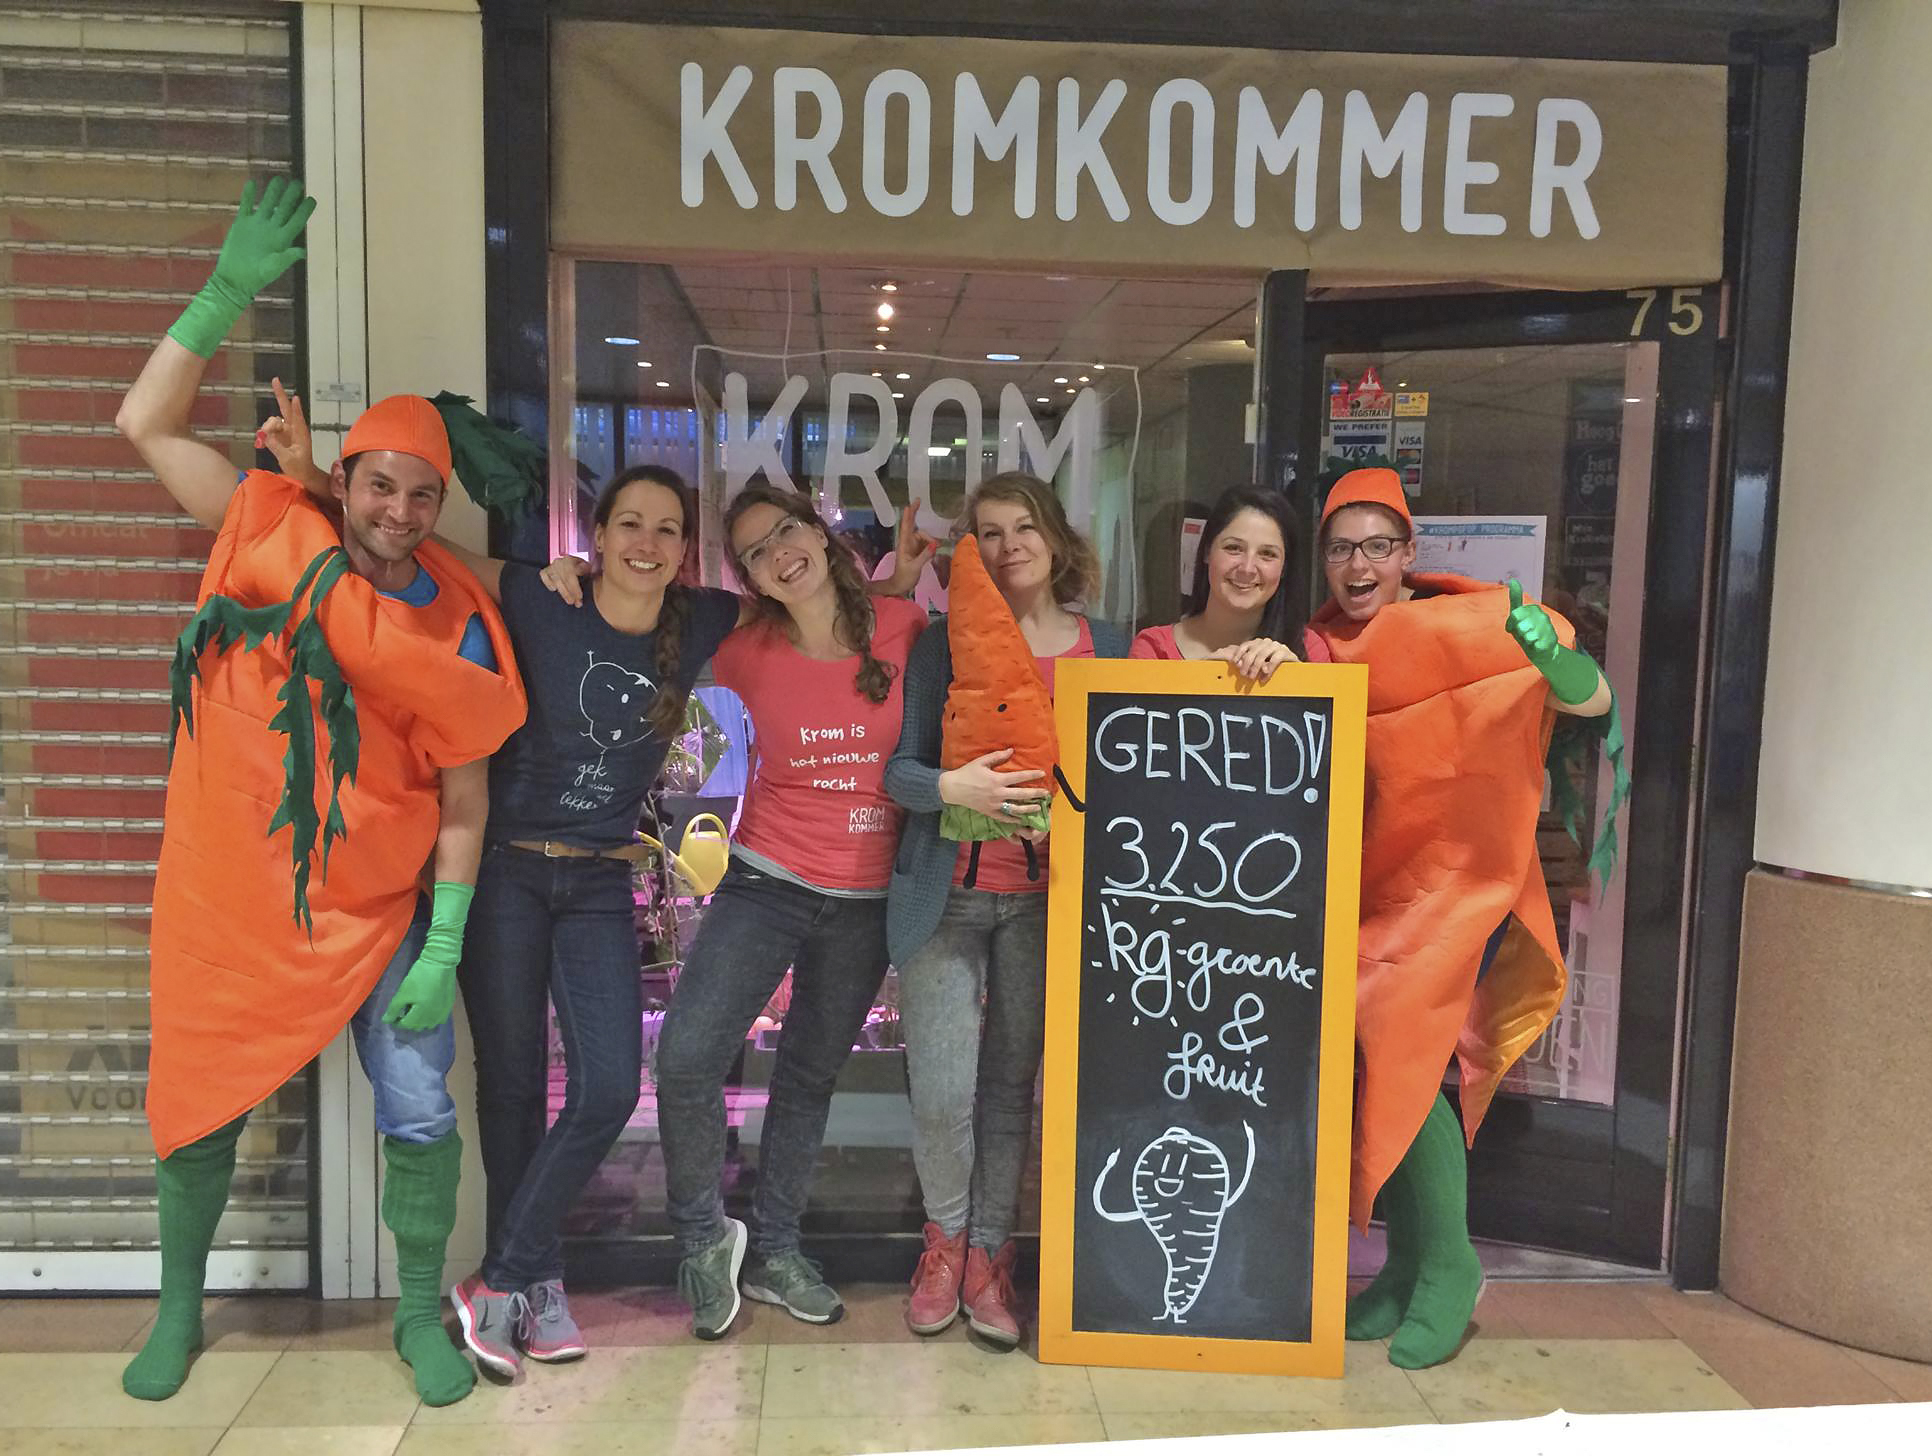 Kromkommer campaigns for fruit rights 2